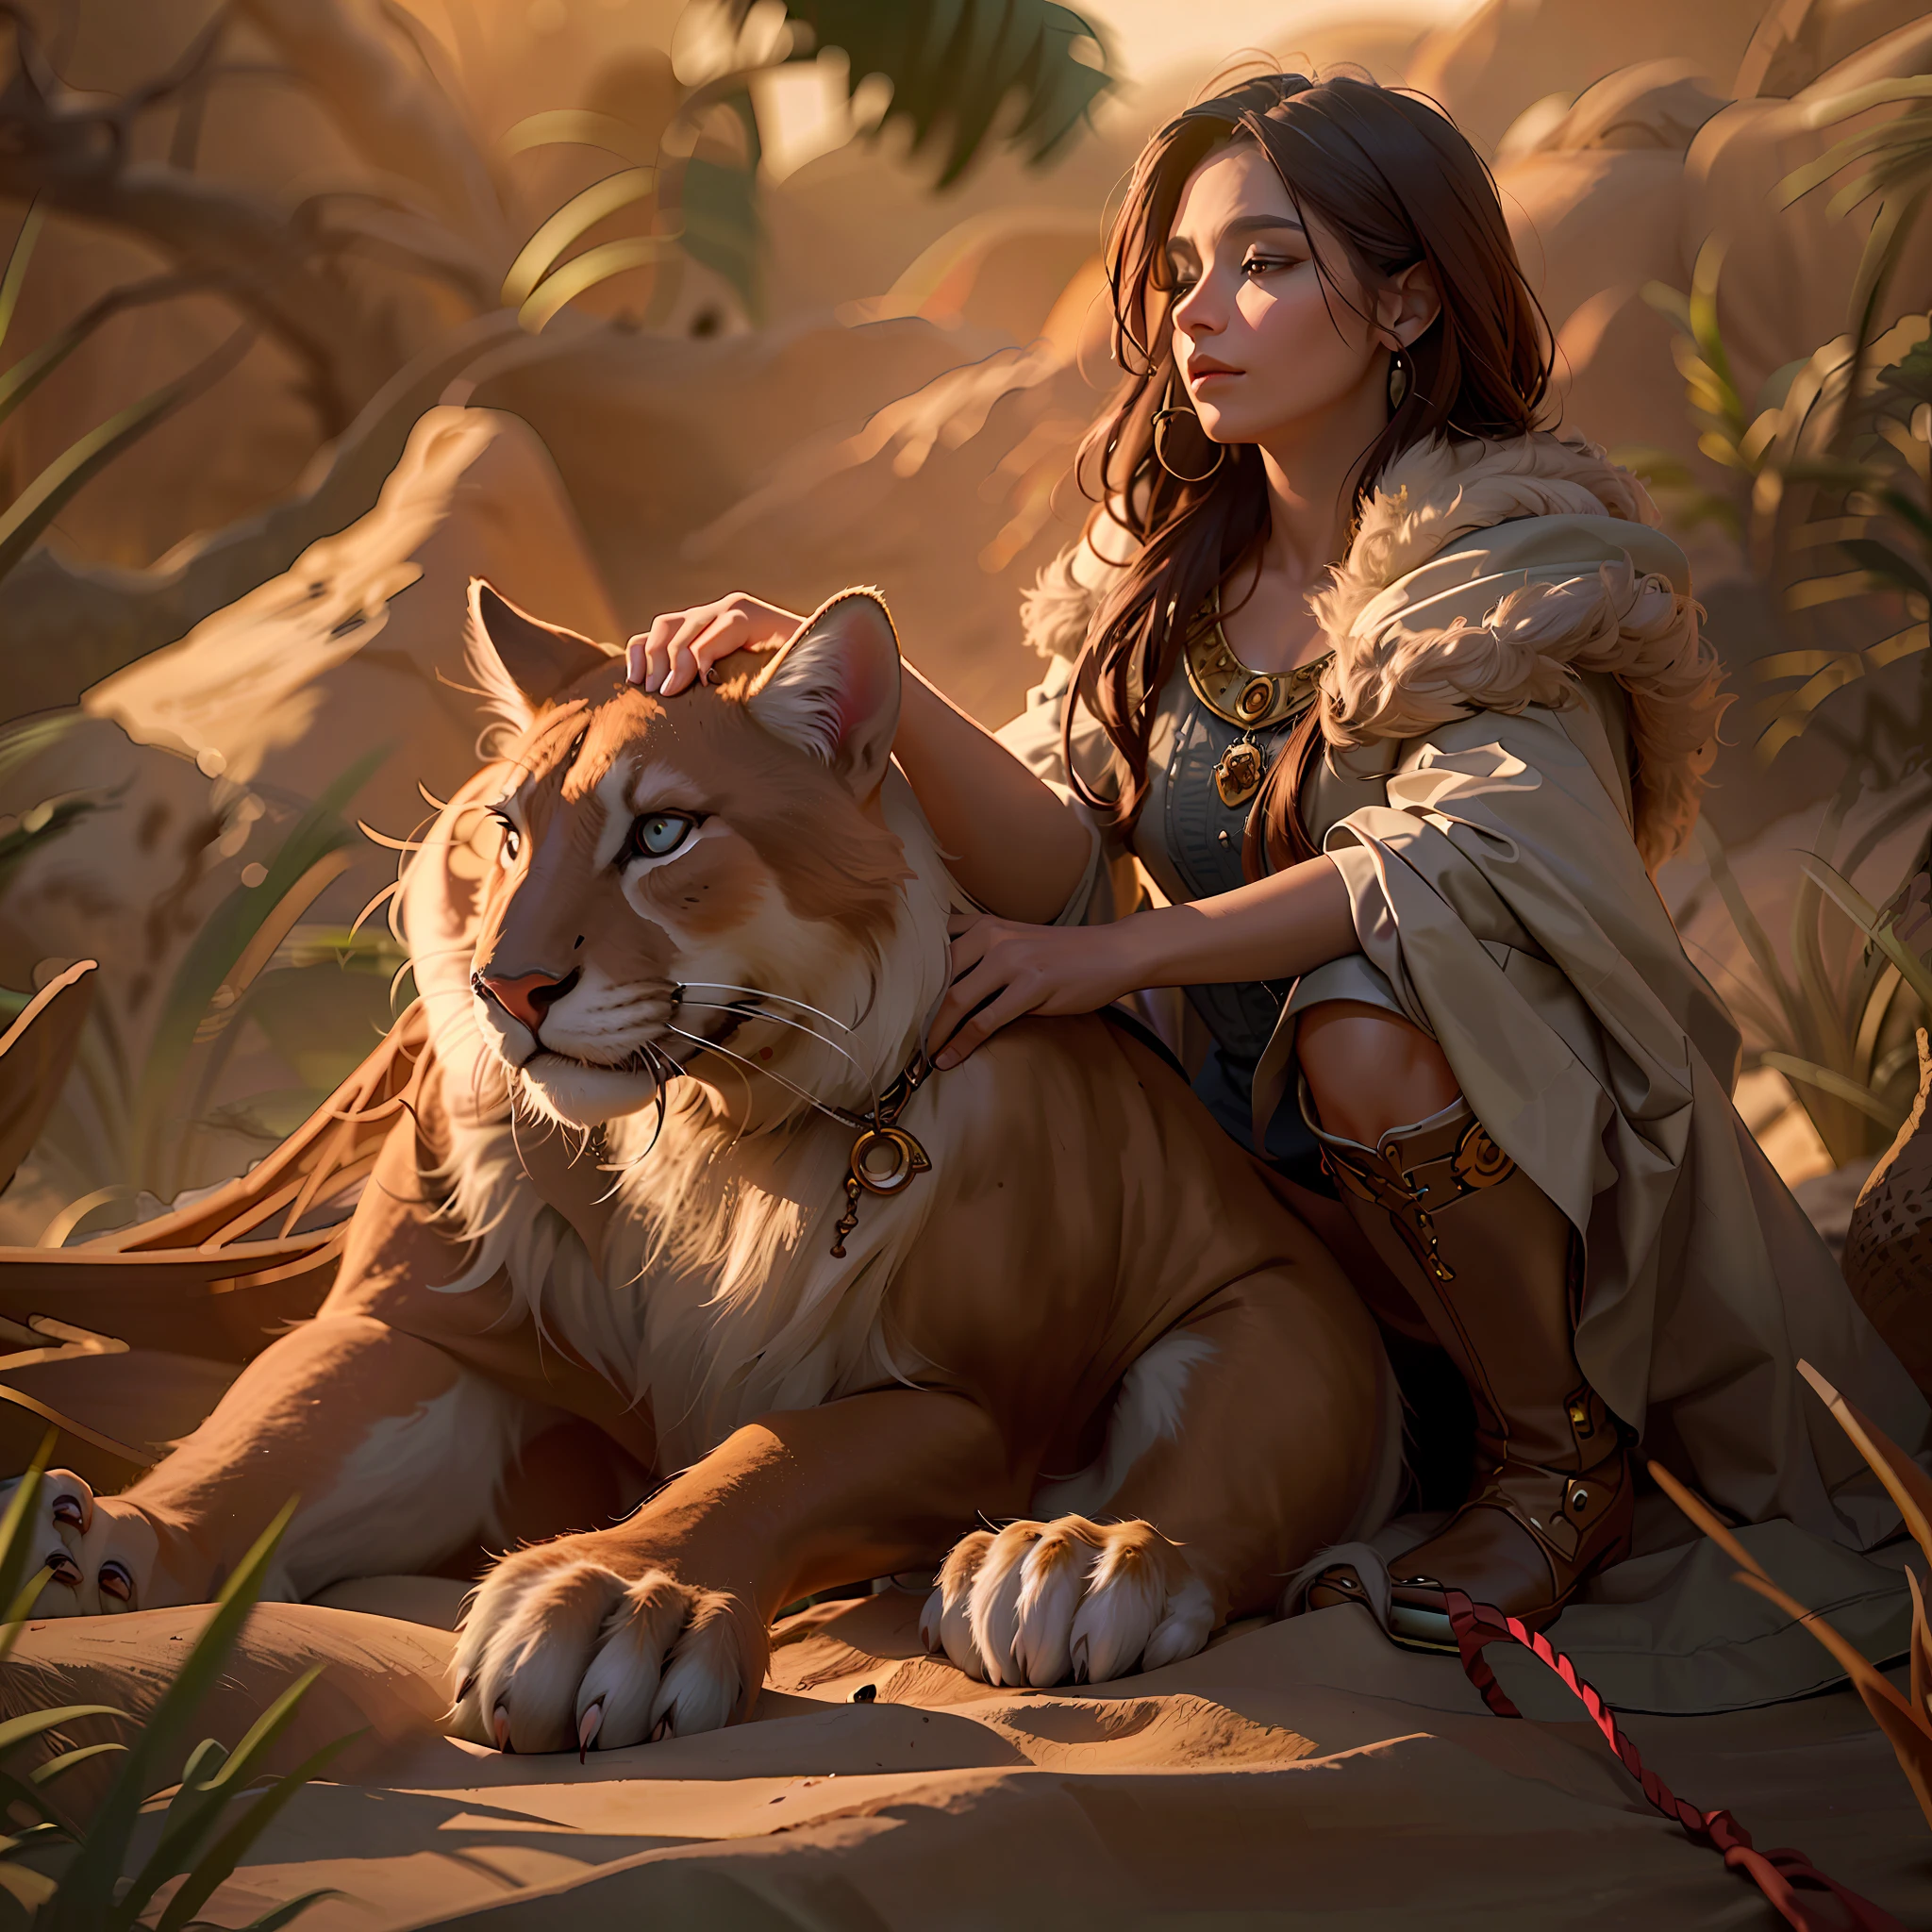 high details, best quality, 8k, [ultra detailed], masterpiece, best quality, (extremely detailed), dynamic angle, ultra wide shot, RAW, photorealistic, fantasy art, dnd art, rpg art, realistic art, a wide angle picture of a female human druid and her pet cougar, priest of nature, cleric of nature, full body, [[anatomically correct]]. dynamic position (1.5 intricate details, Masterpiece, best quality) talking to a desert cougar (1.6 intricate details, Masterpiece, best quality) in desert (1.5 intricate details, Masterpiece, best quality), a female  wearing leather clothes (1.4 intricate details, Masterpiece, best quality), leather boots, thick hair, long hair, brown hair, tan skin intense brown eyes, desert background (intense details), a stream flowing in an oasis (1.4 intricate details, Masterpiece, best quality), night, moon light, stars (1.4 intricate details, Masterpiece, best quality), dynamic angle, (1.4 intricate details, Masterpiece, best quality) 3D rendering, high details, best quality, highres, ultra wide angle